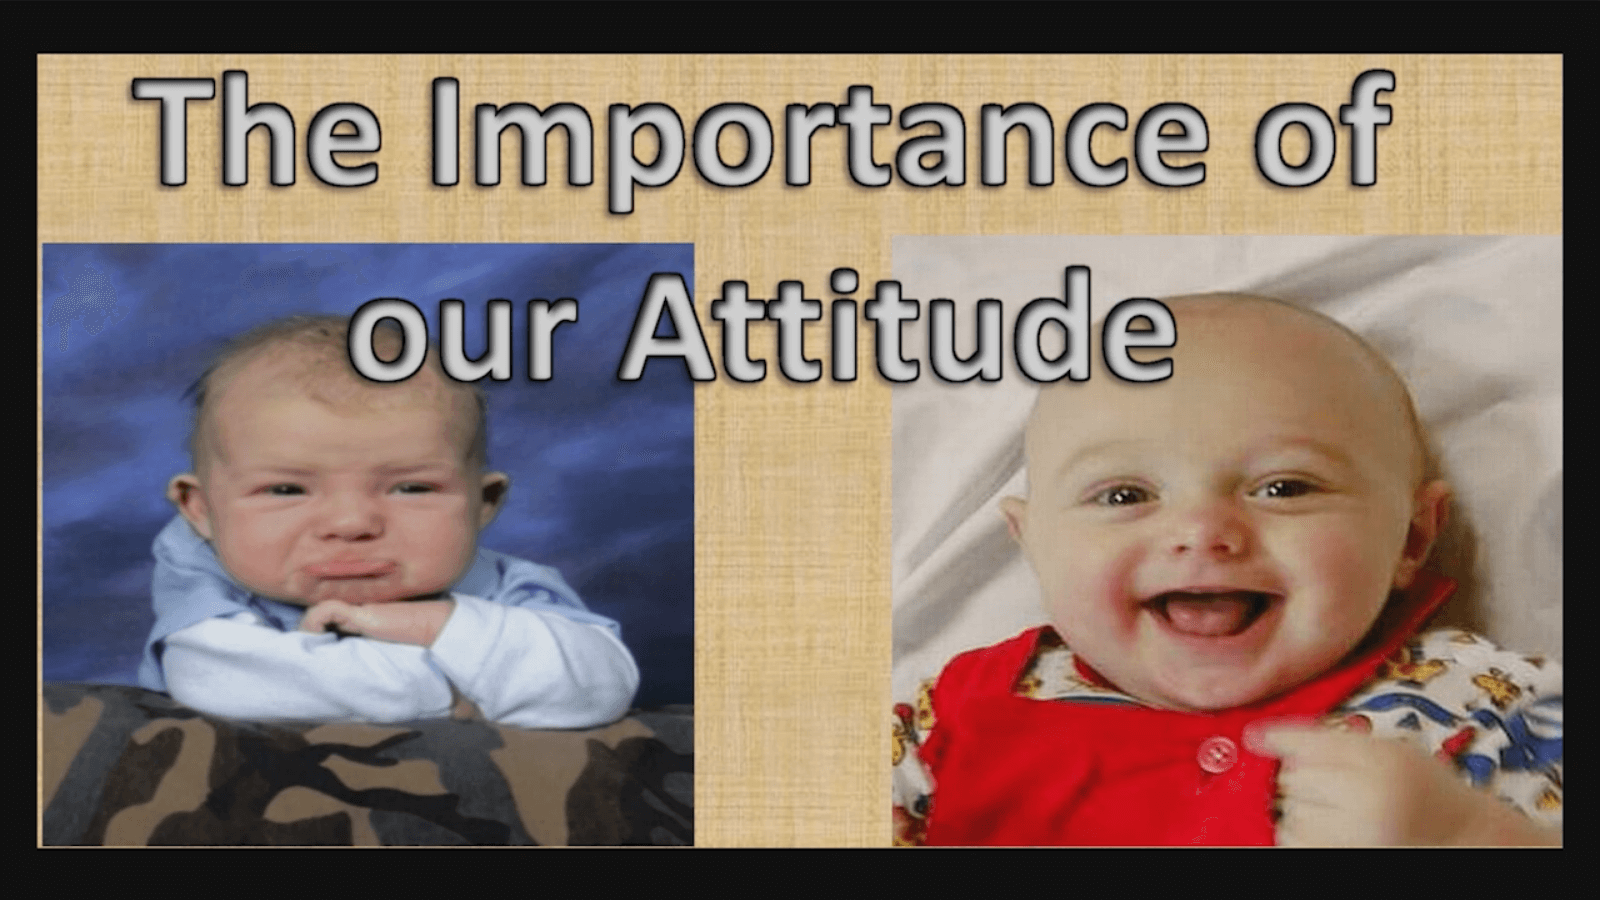 The Importance of our Attitude